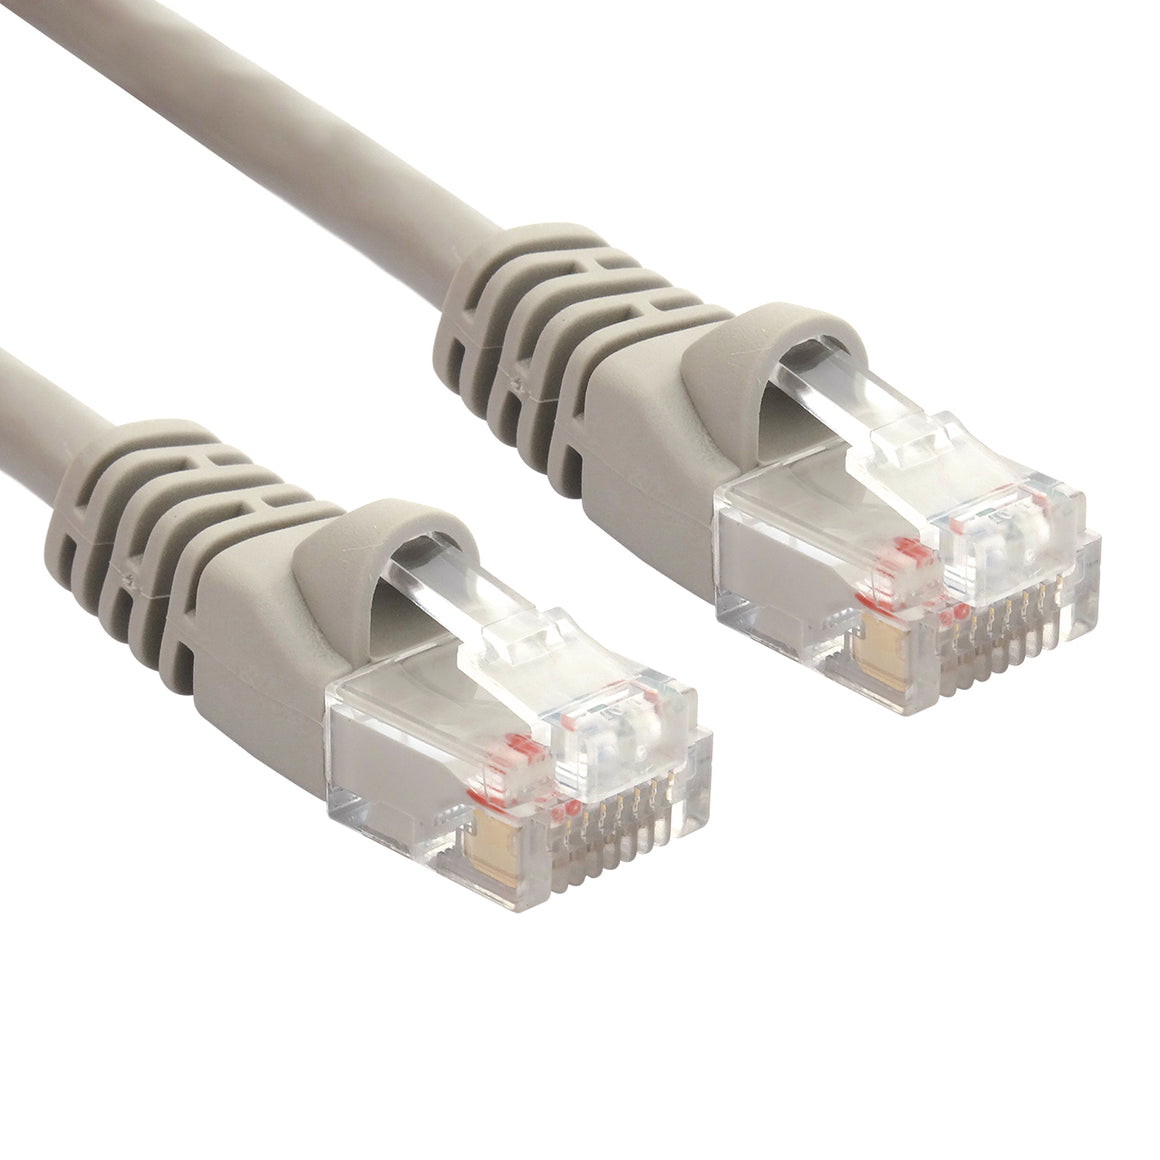 Yellow RJ45 CAT 5e Ethernet Network Patch Cable 350MHz Gold Plated UTP